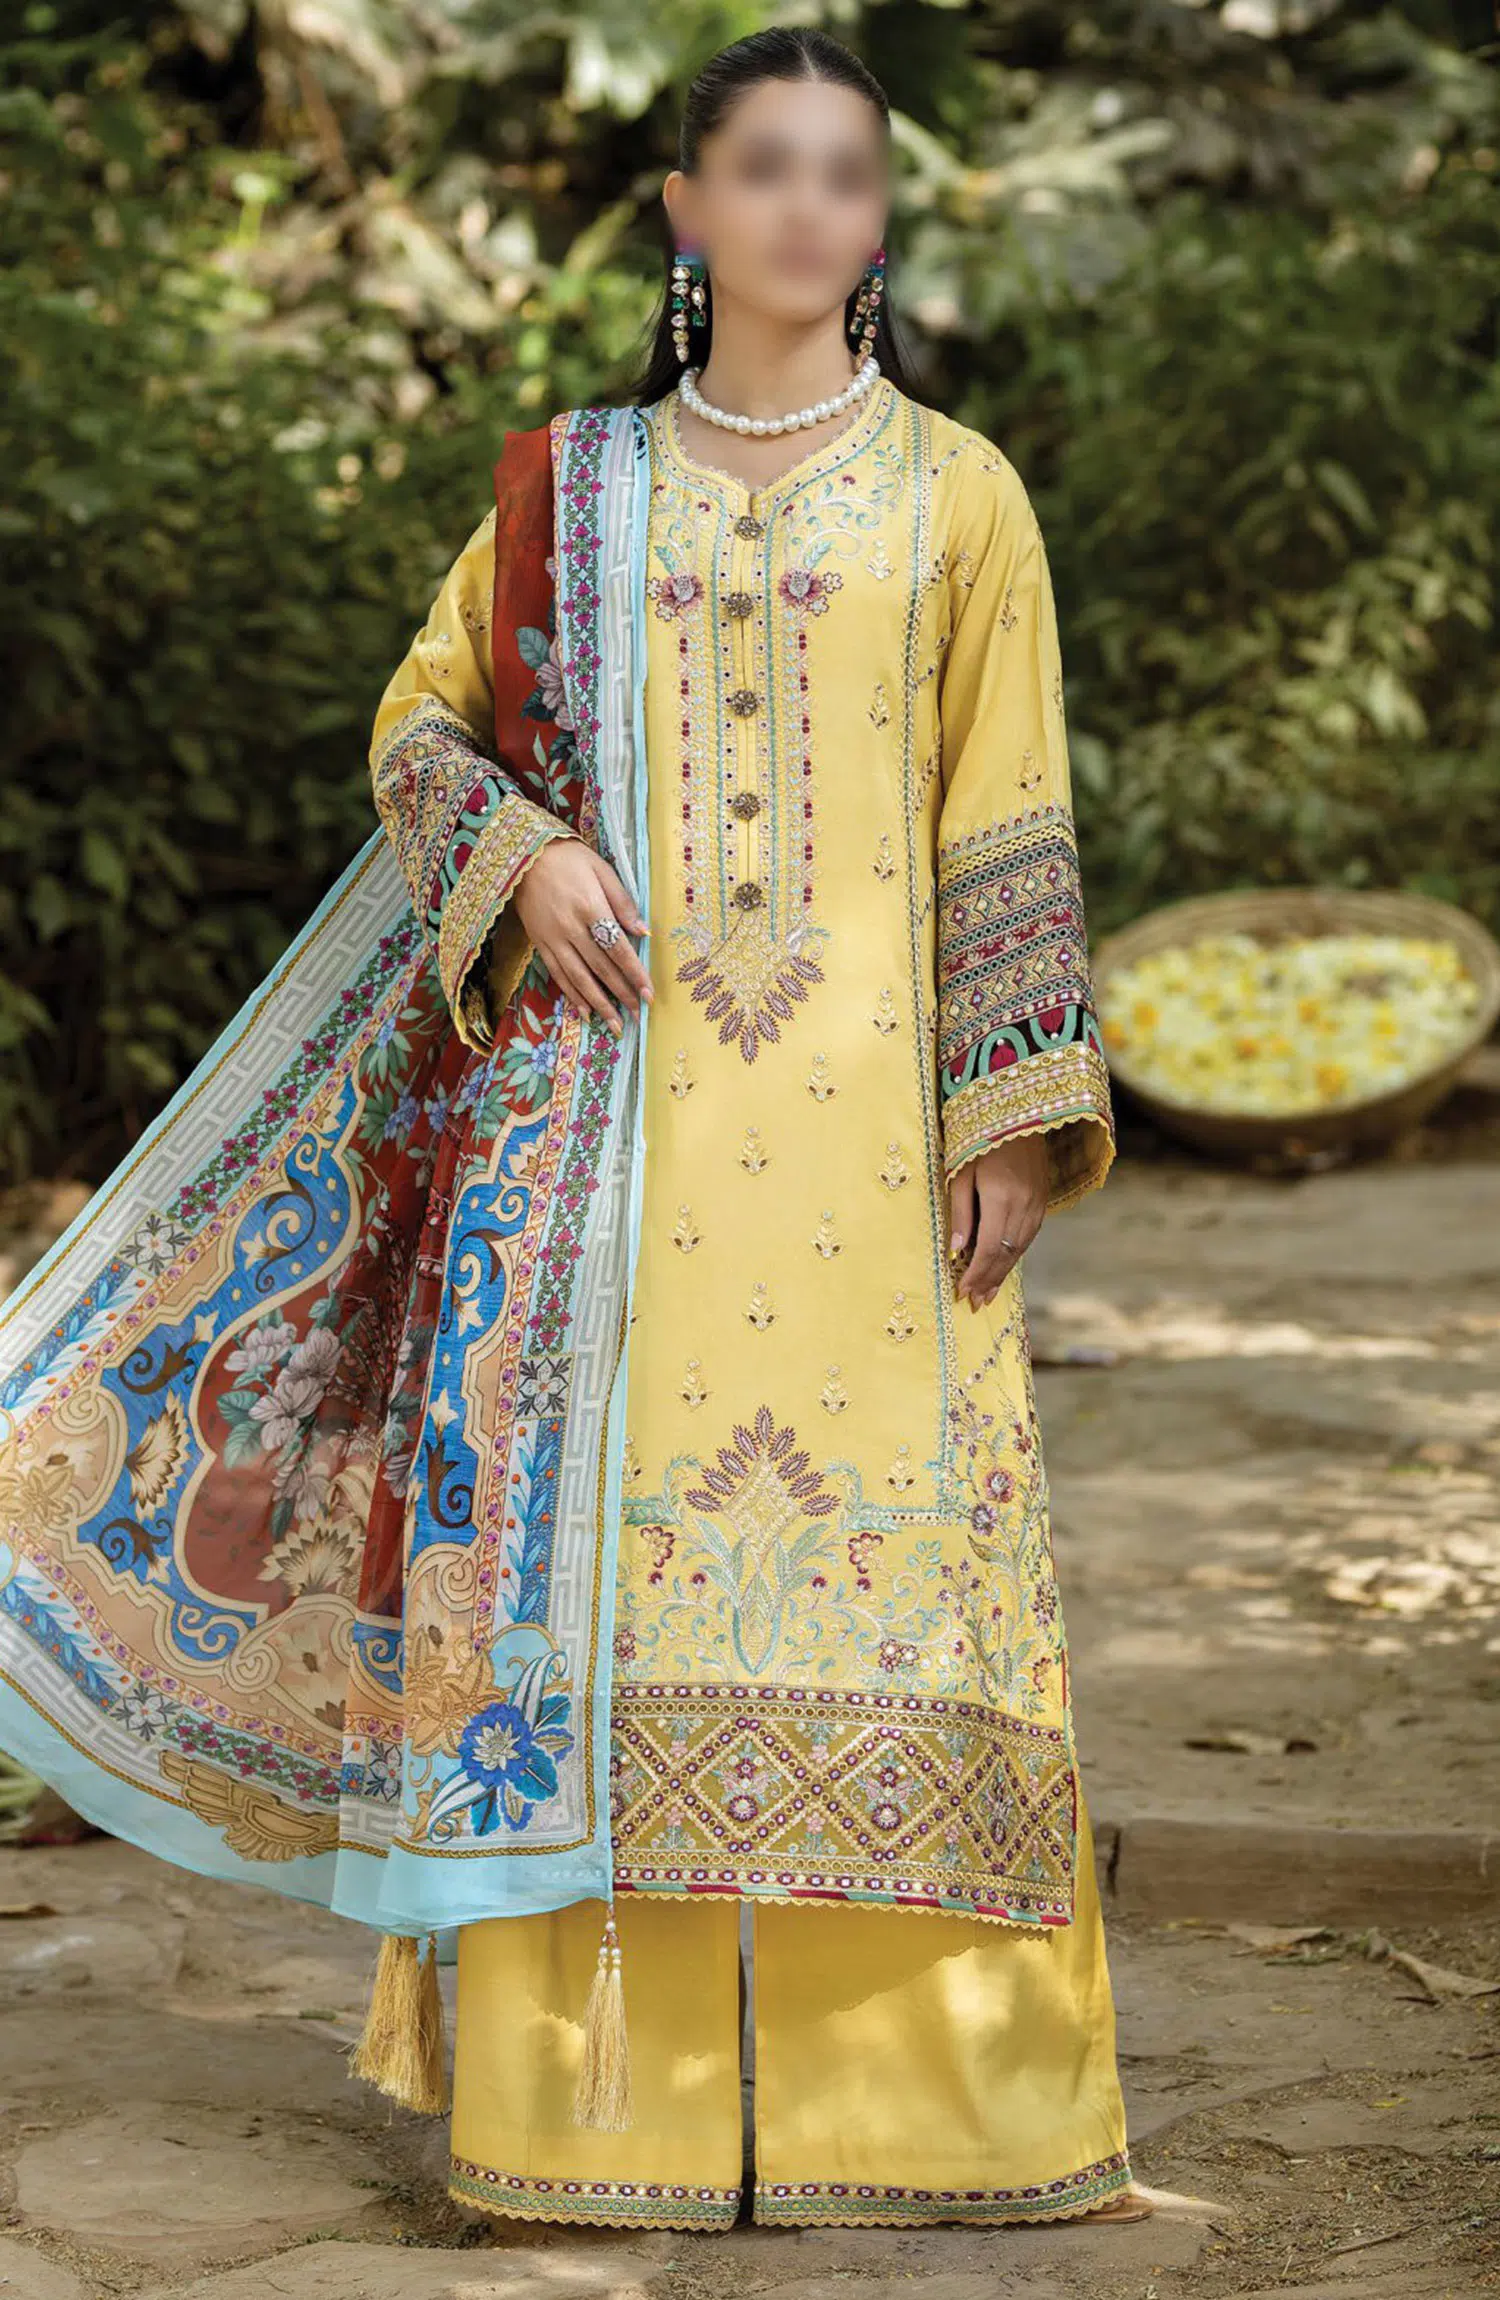 Jaan-E-Adaa Lawn Collection By Imrozia - IPL - 06  TABASSUM